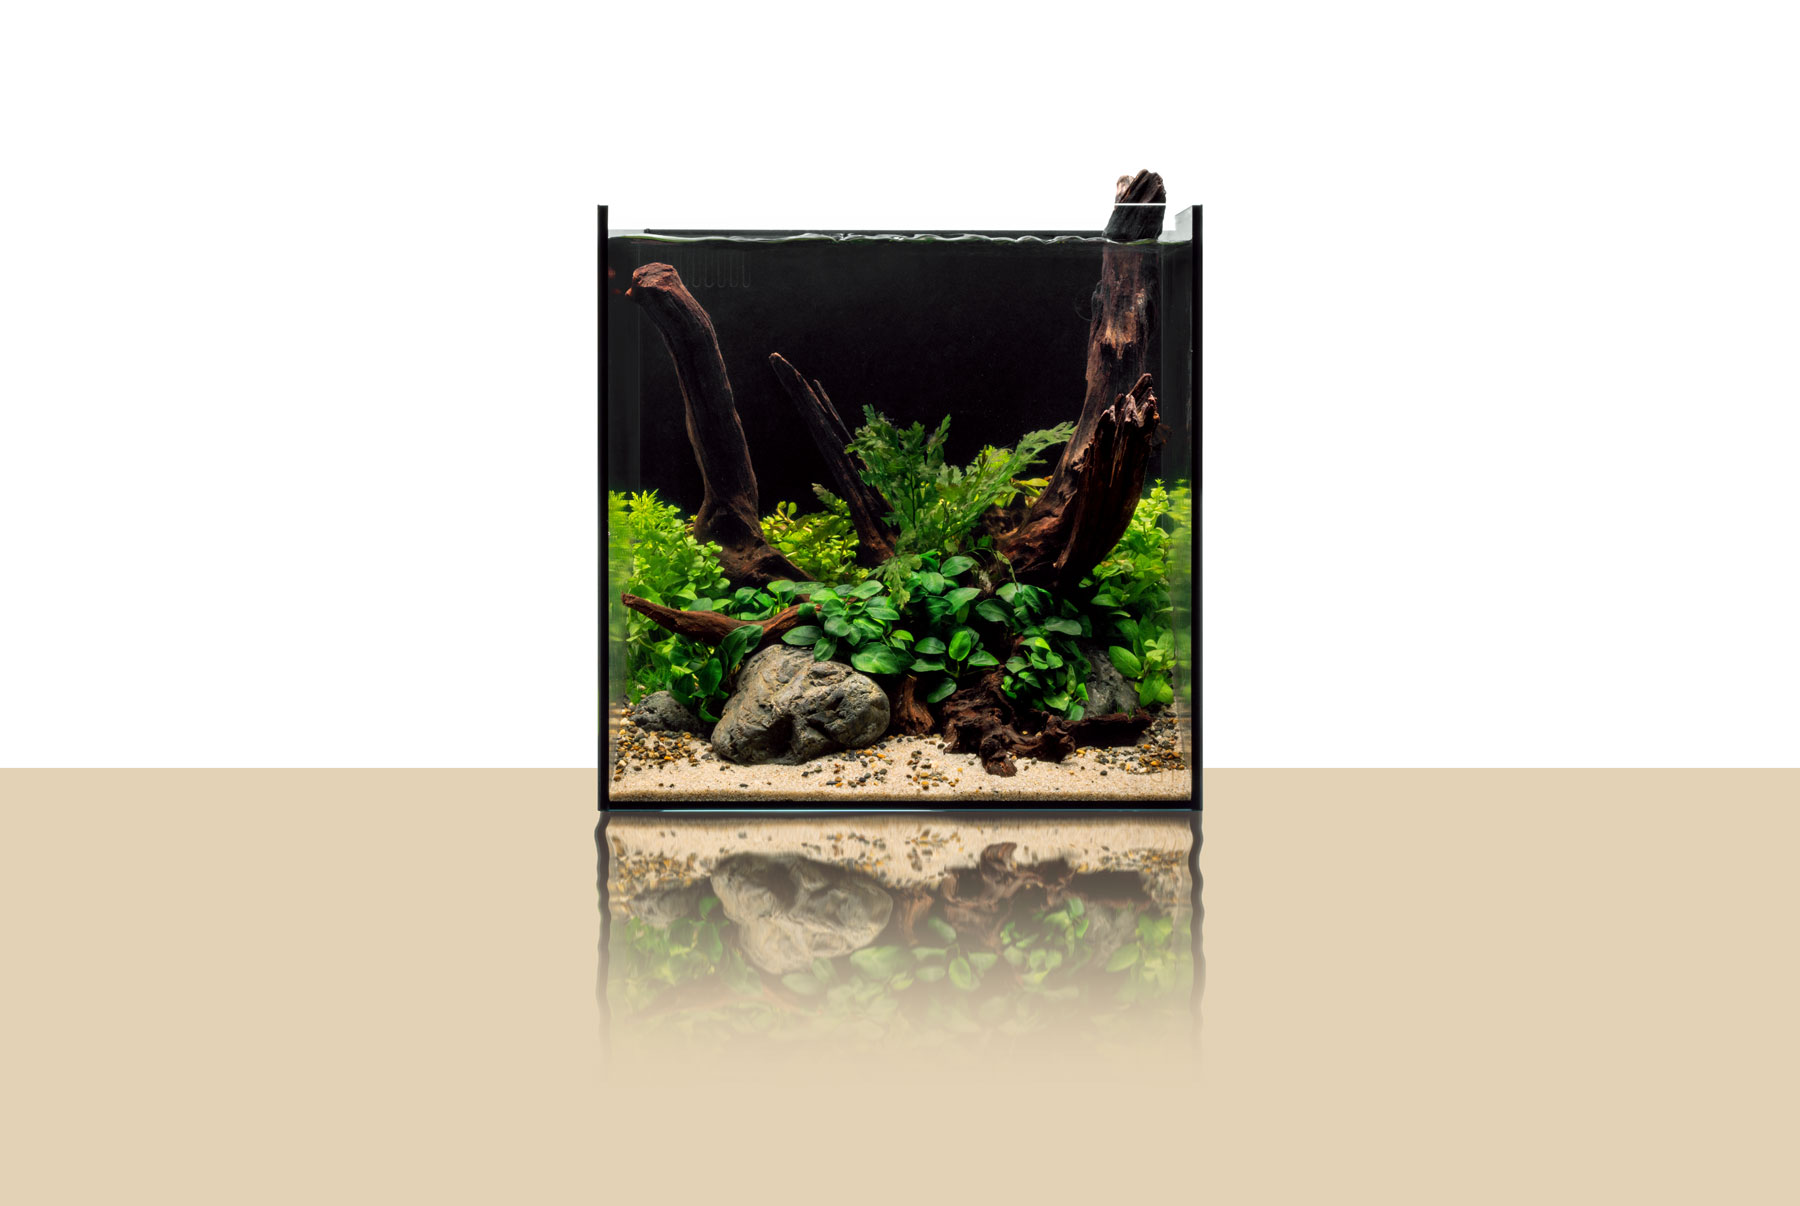 7 in 1 Stainless Steel Aquatic Plant Aquascaping UK